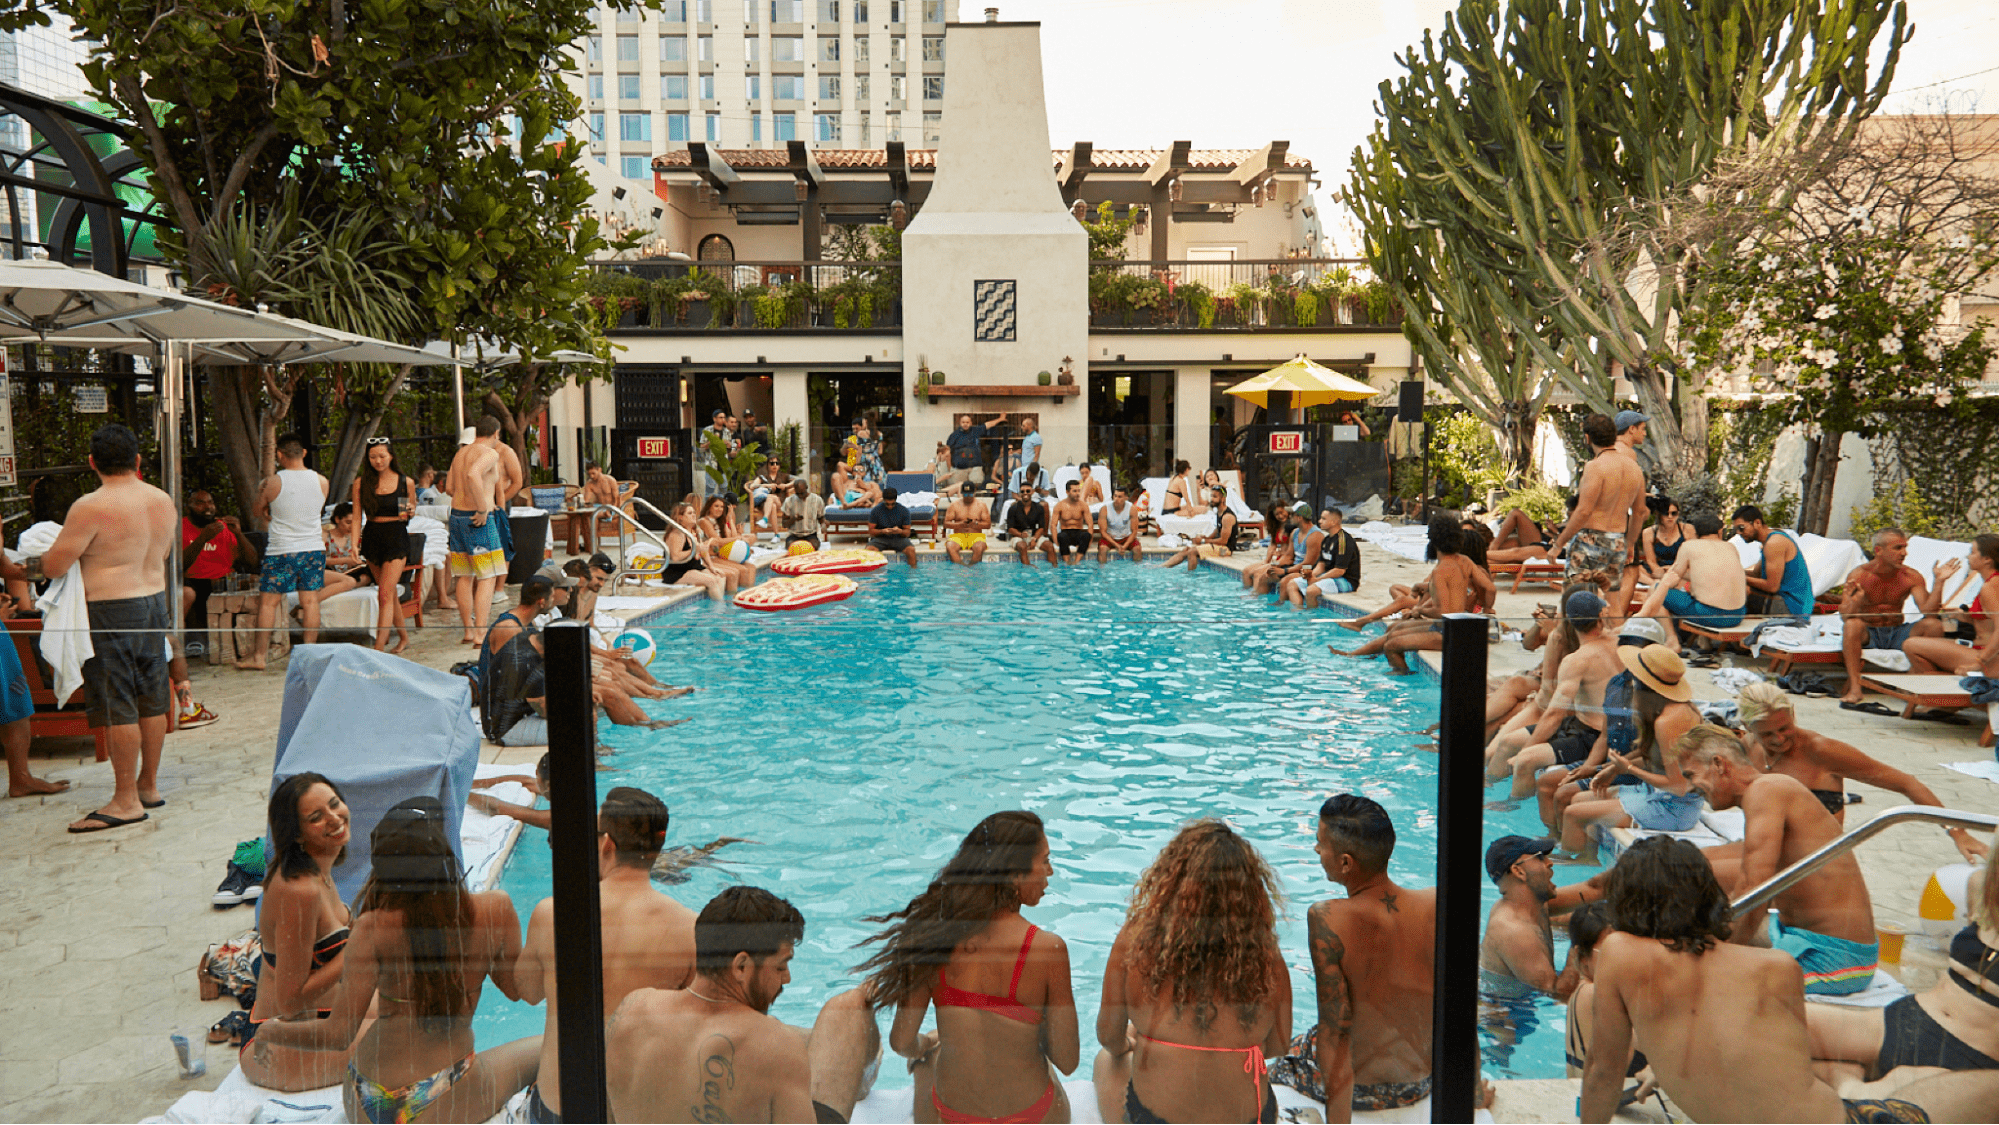 Dozens of people at a pool party